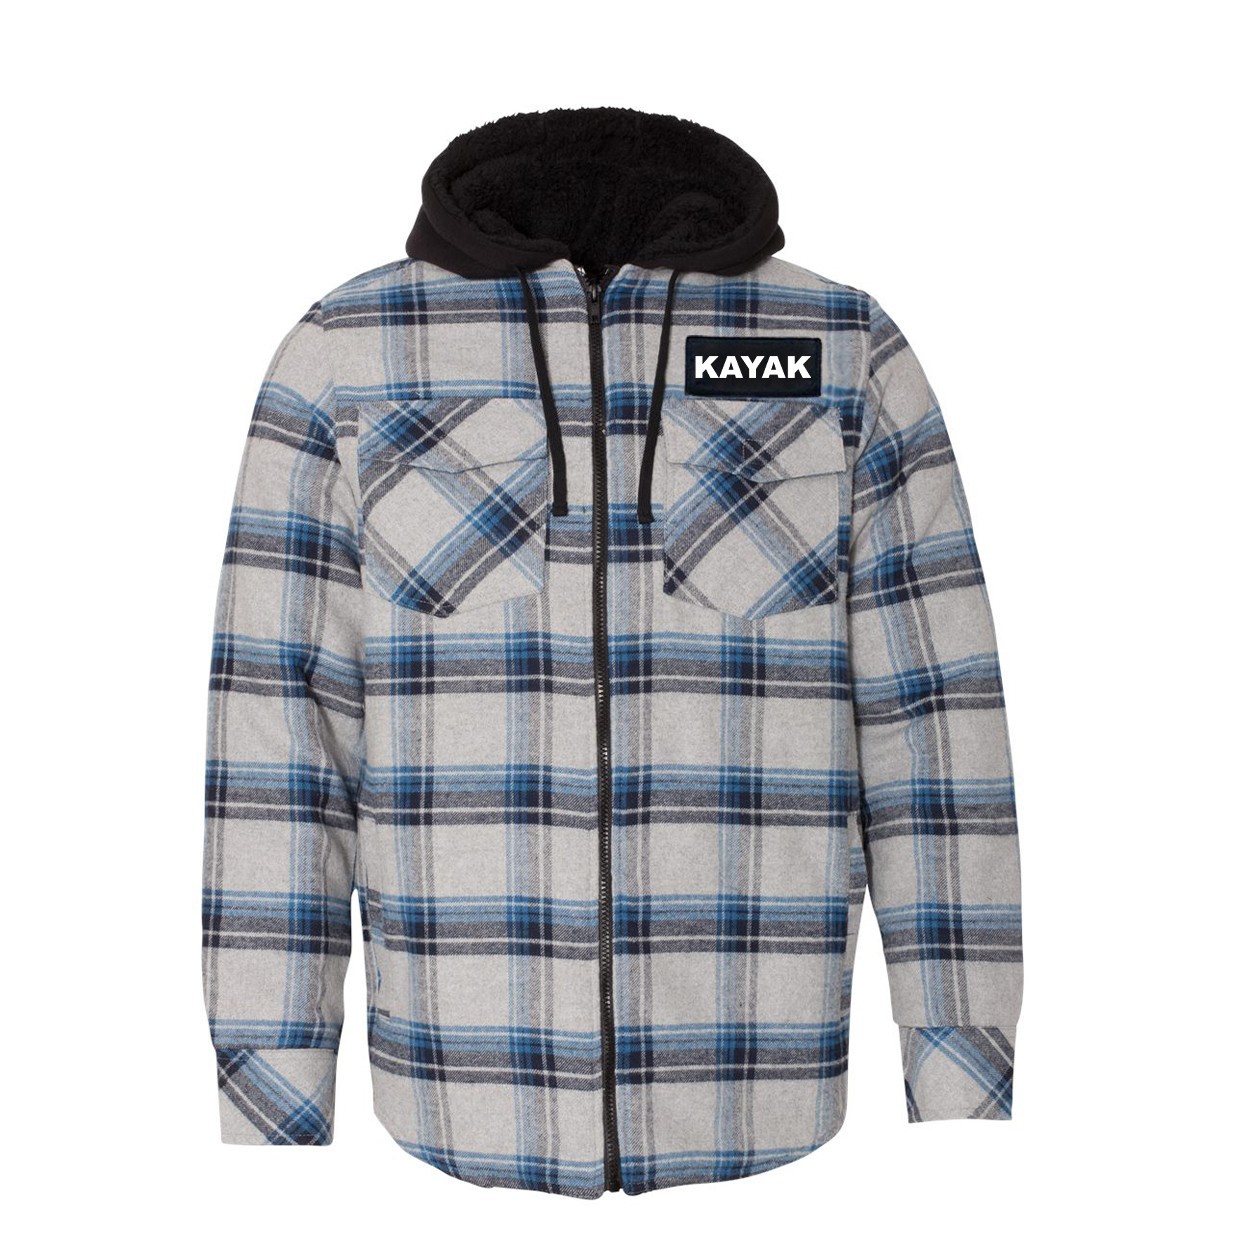 Kayak Brand Logo Classic Unisex Full Zip Woven Patch Hooded Flannel Jacket Gray/ Blue